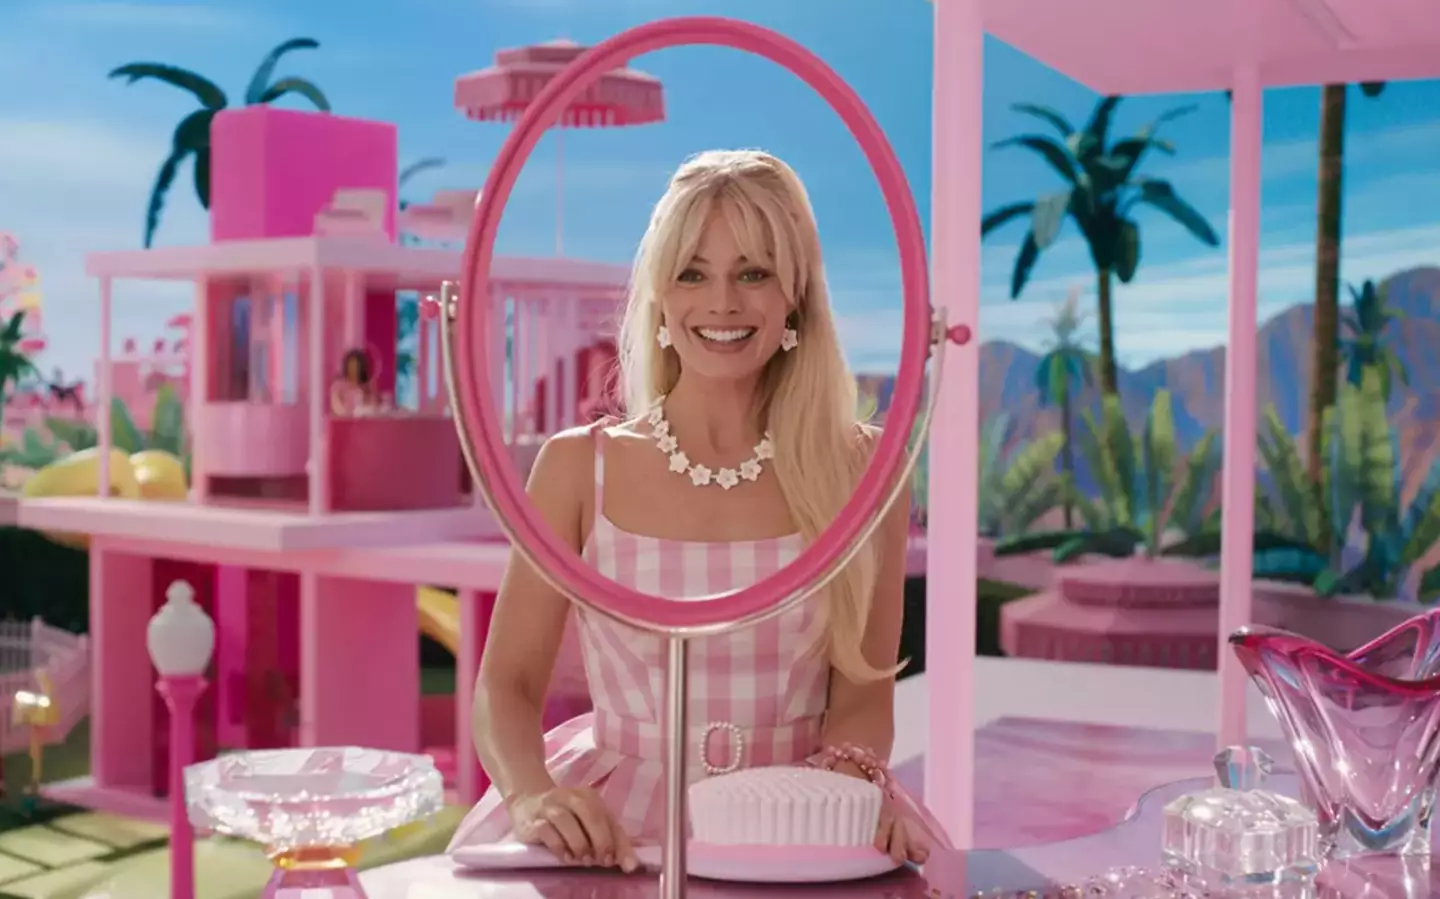 The actor starred as Barbie last year.